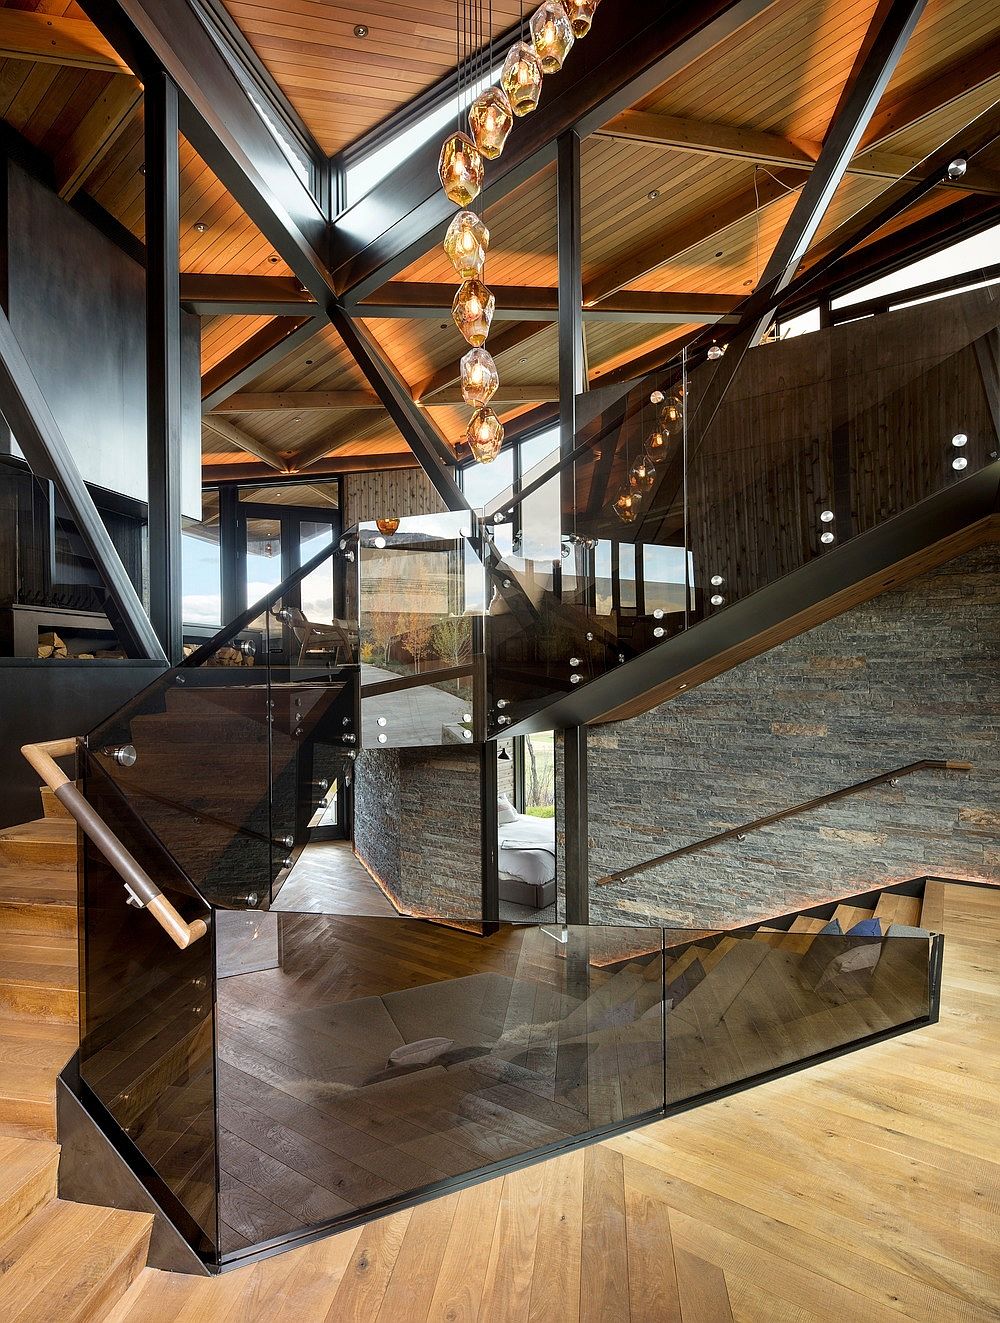 Polished glass and metal surfaces along with wooden warmth inside the house